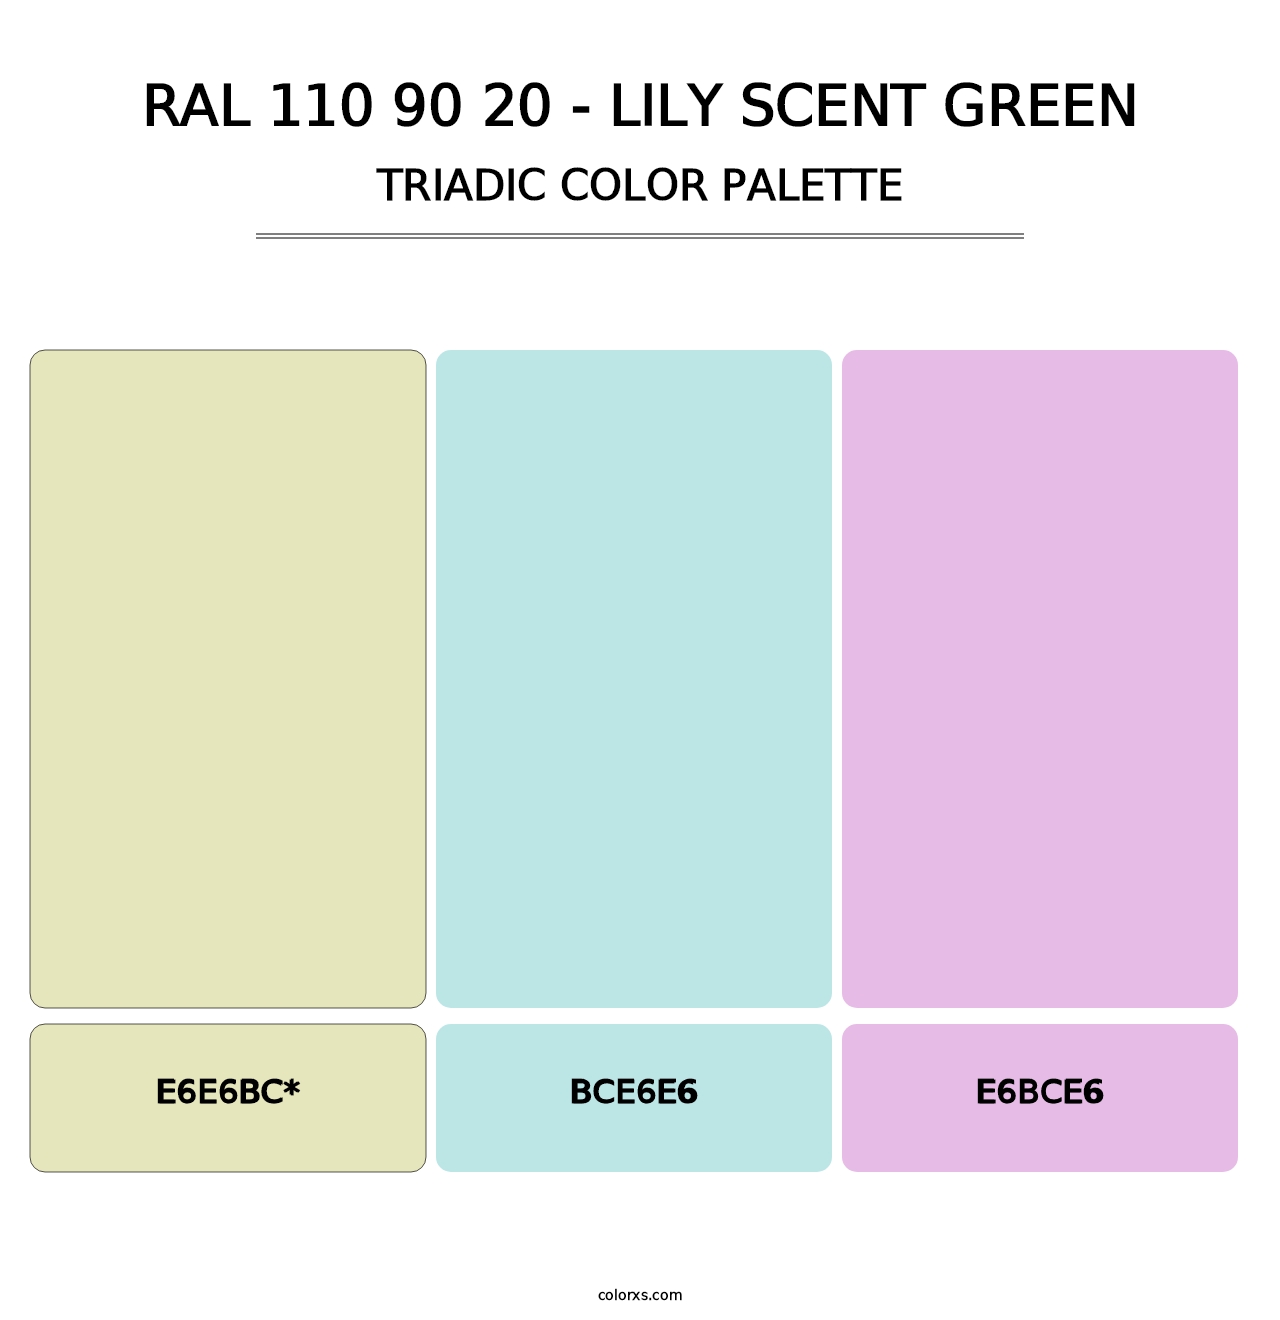 RAL 110 90 20 - Lily Scent Green - Triadic Color Palette